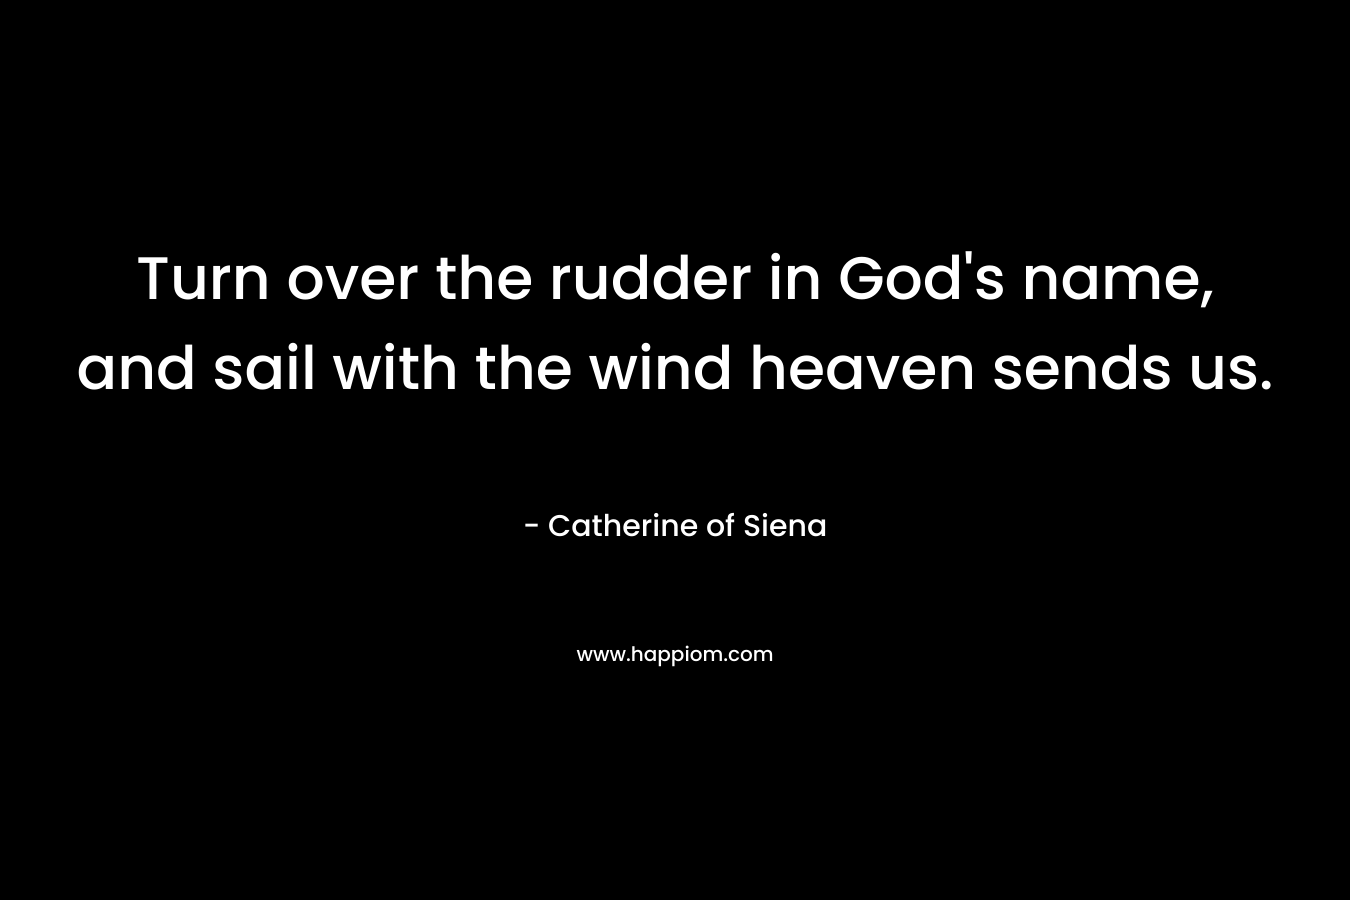 Turn over the rudder in God's name, and sail with the wind heaven sends us.